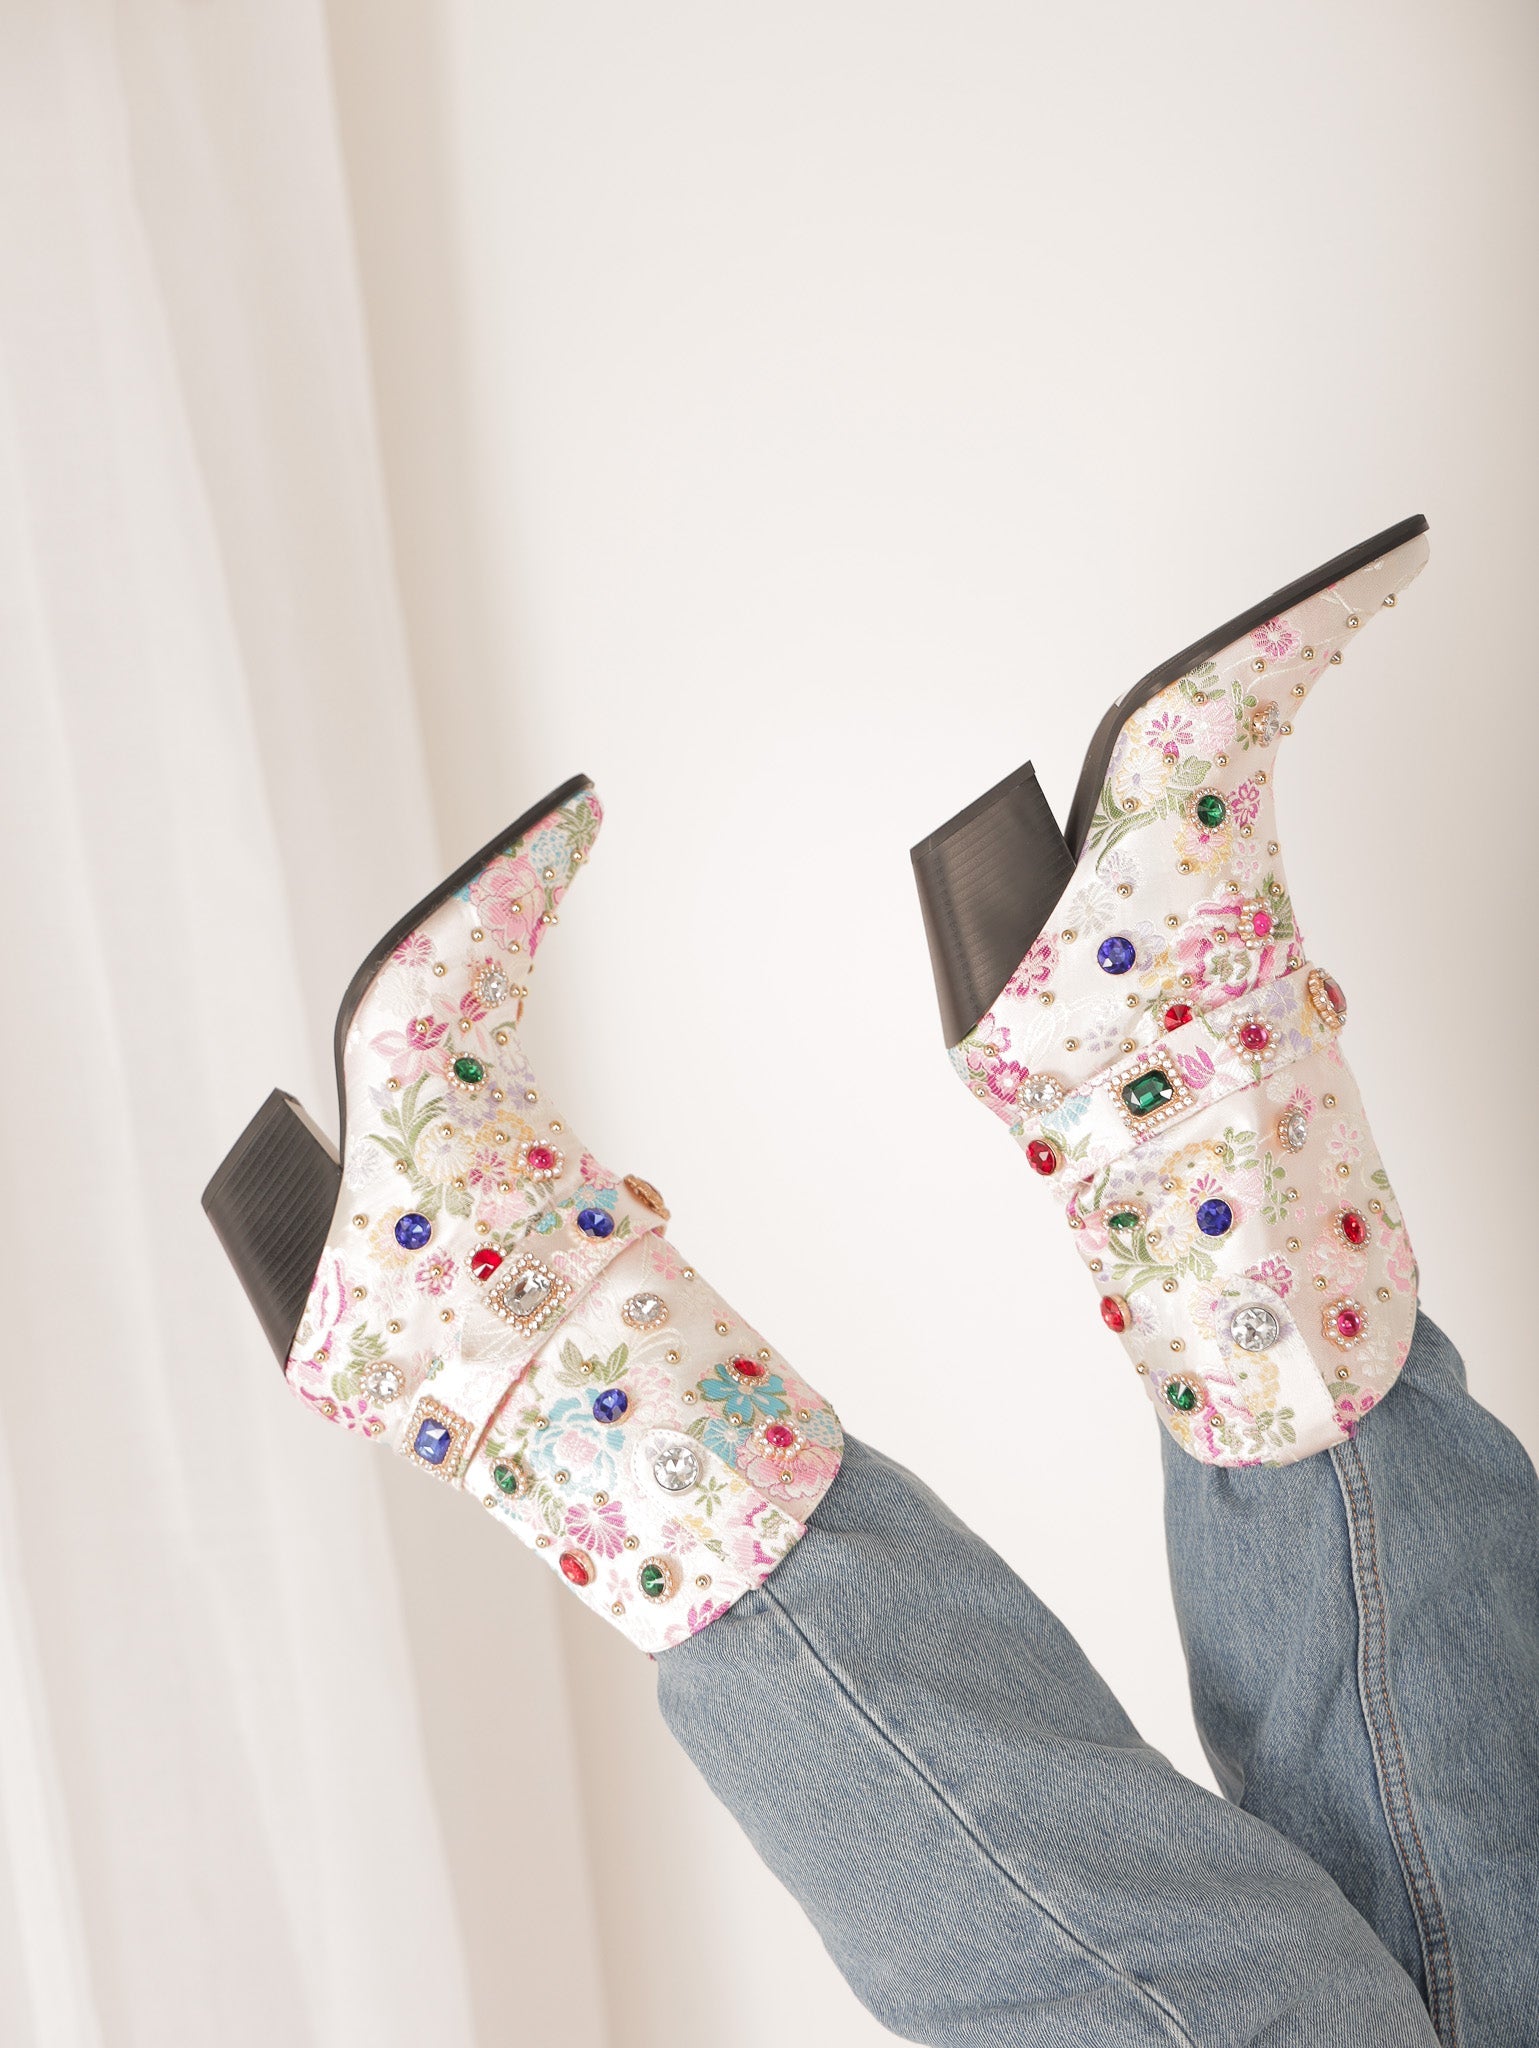 Molly Green - Dolly Boots - Shoes